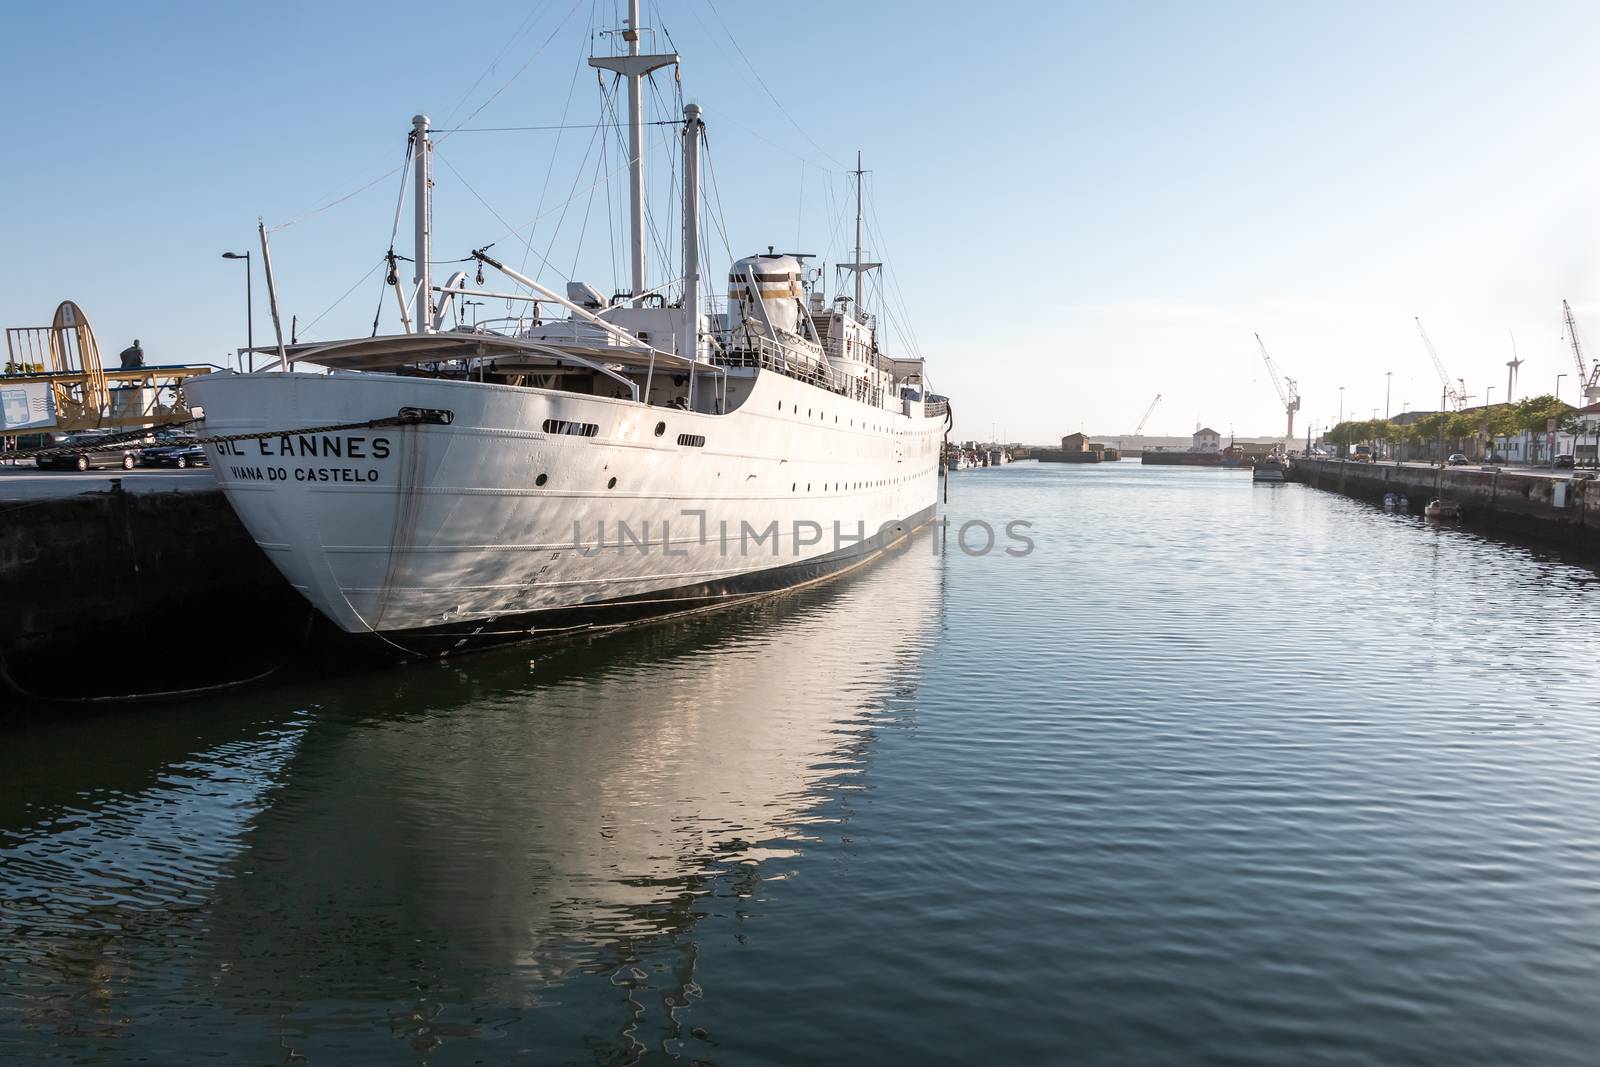 Viana Do Castelo, Portugal - May 10, 2018: View of the Gil Eannes, former hospital ship, now transformed into a museum and youth hostel. it is moored in persmanence in the city port